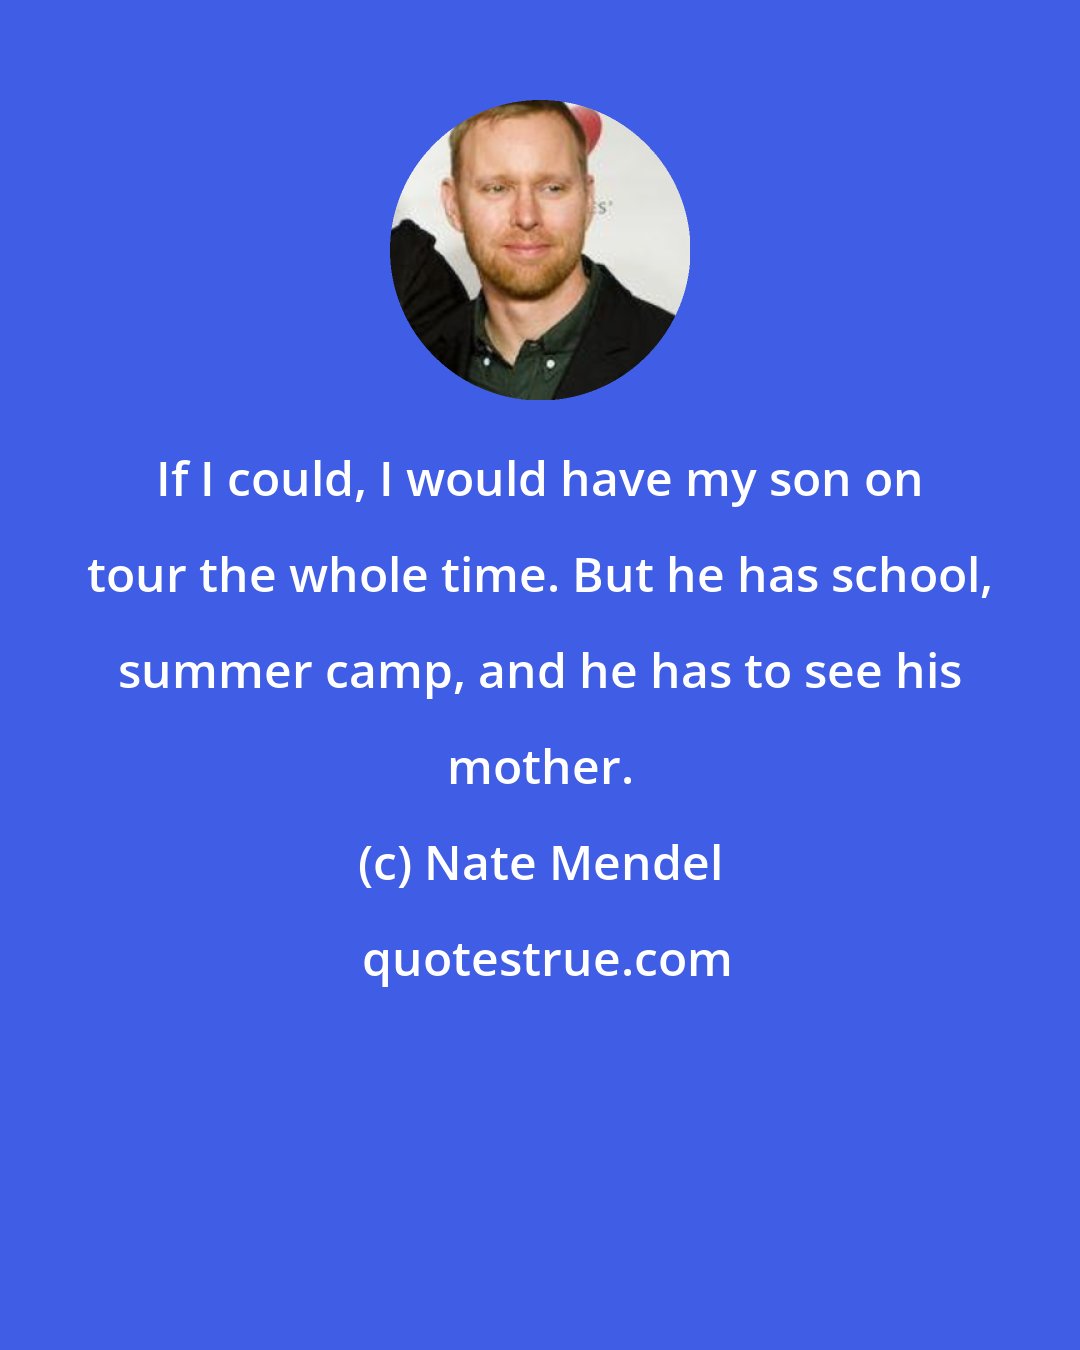 Nate Mendel: If I could, I would have my son on tour the whole time. But he has school, summer camp, and he has to see his mother.